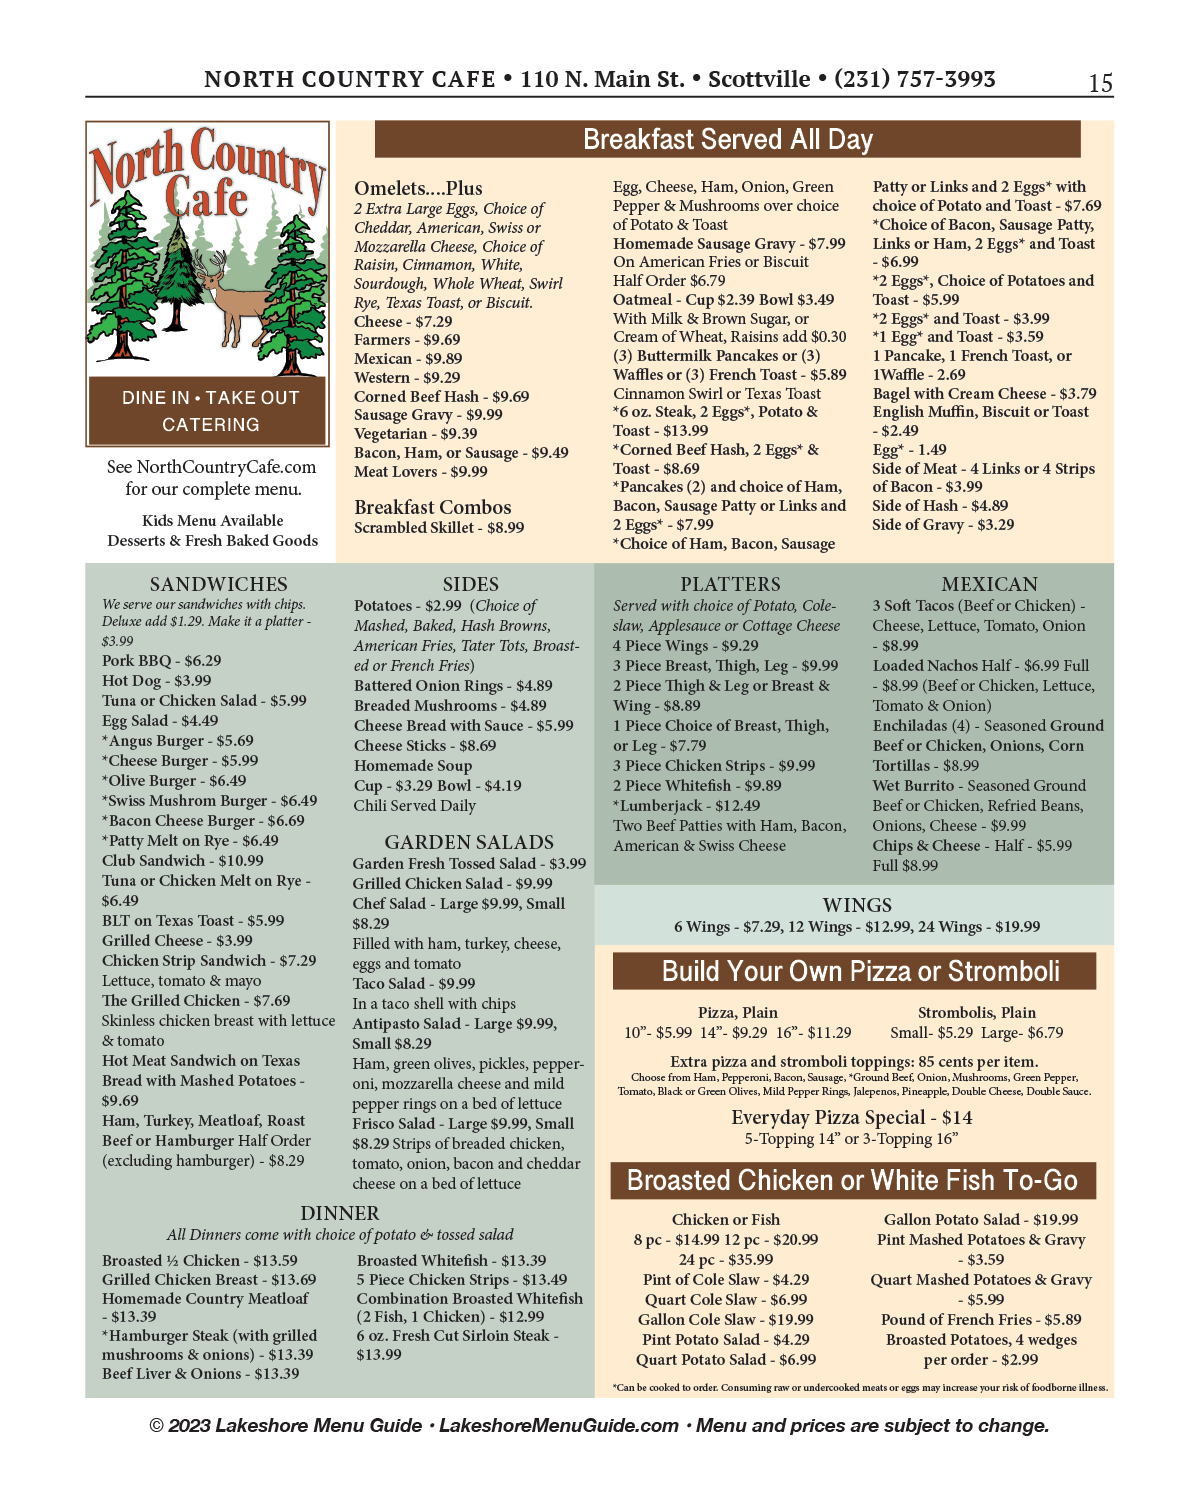 Menu for North Country Cafe in downtown Scottville from the Lakeshore Menu Guide